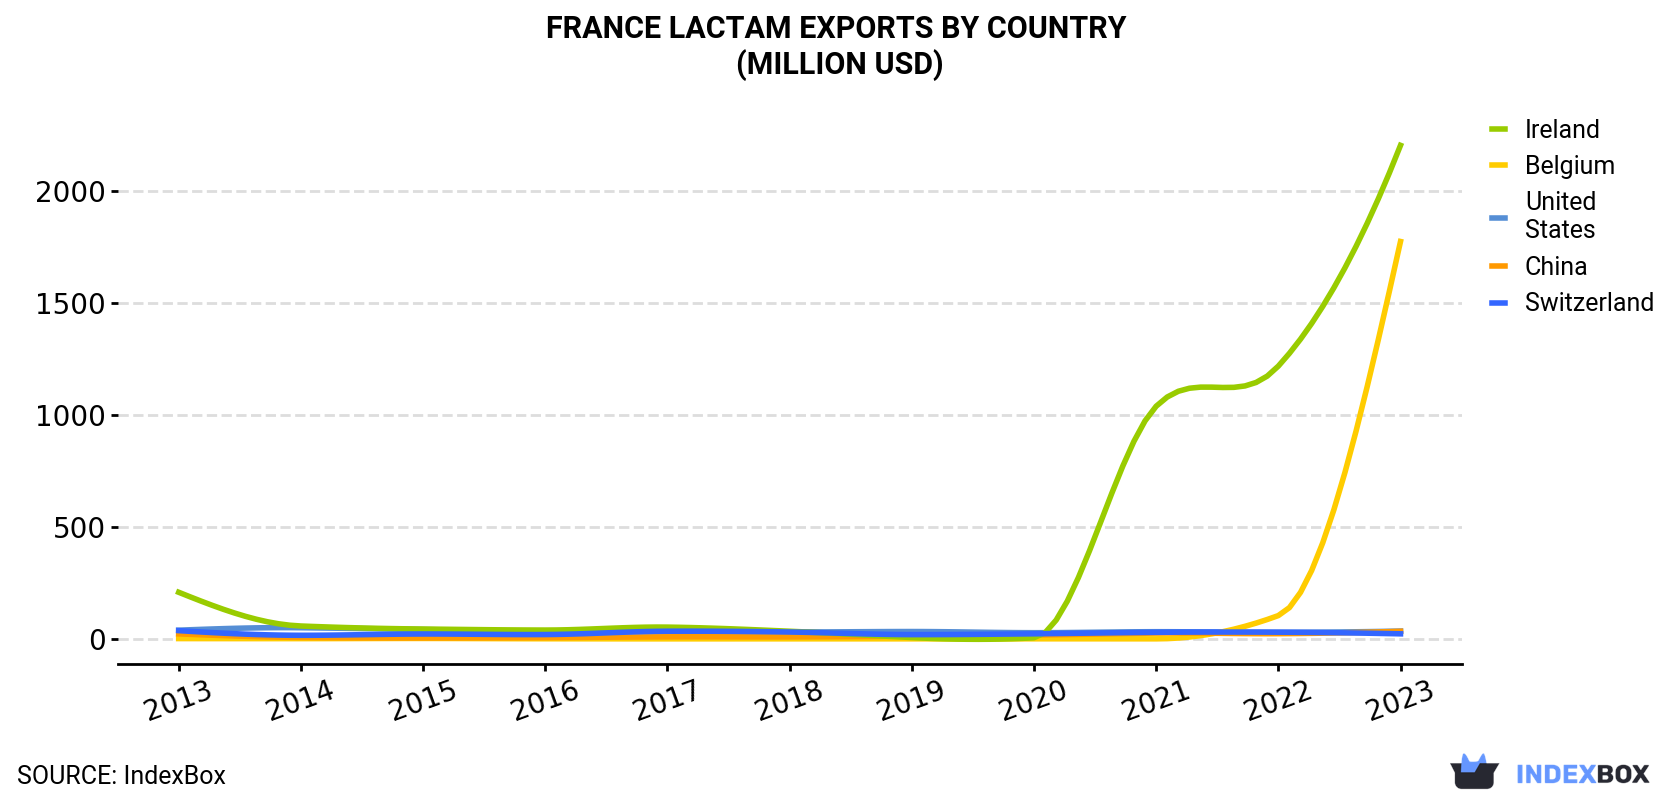 France Lactam Exports By Country (Million USD)